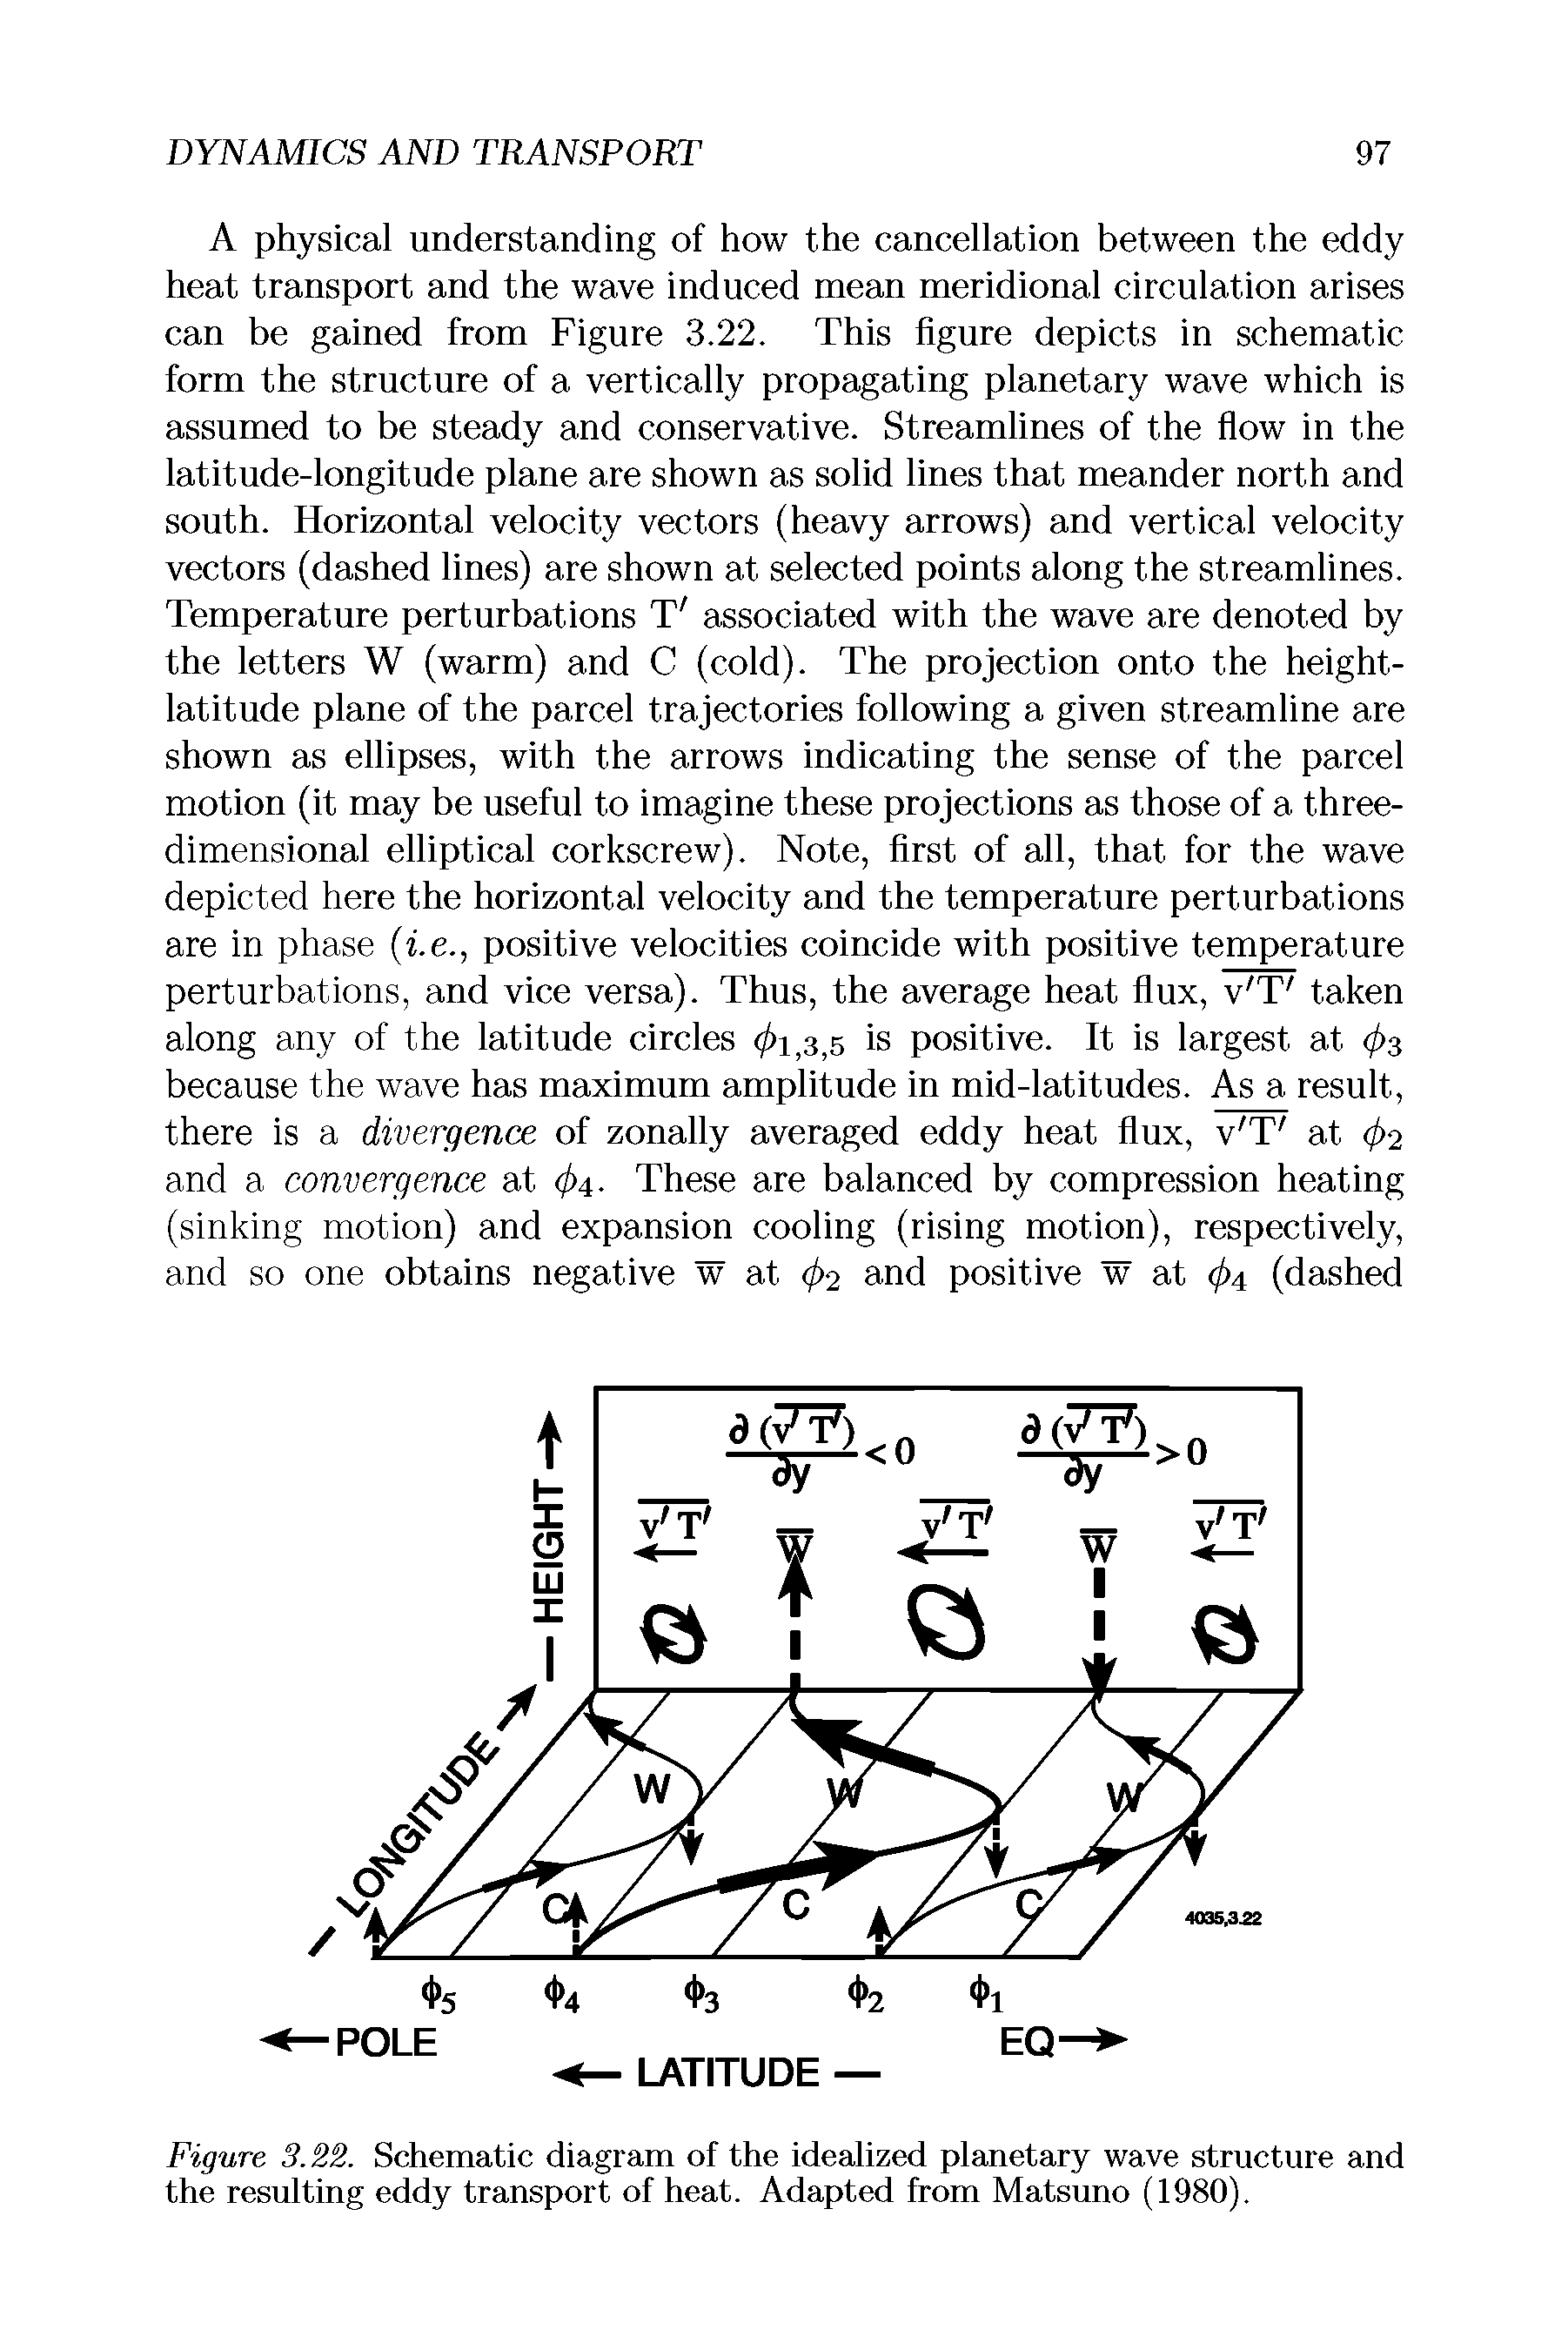 Figure 3.22. Schematic diagram of the idealized planetary wave structure and the resulting eddy transport of heat. Adapted from Matsuno (1980).